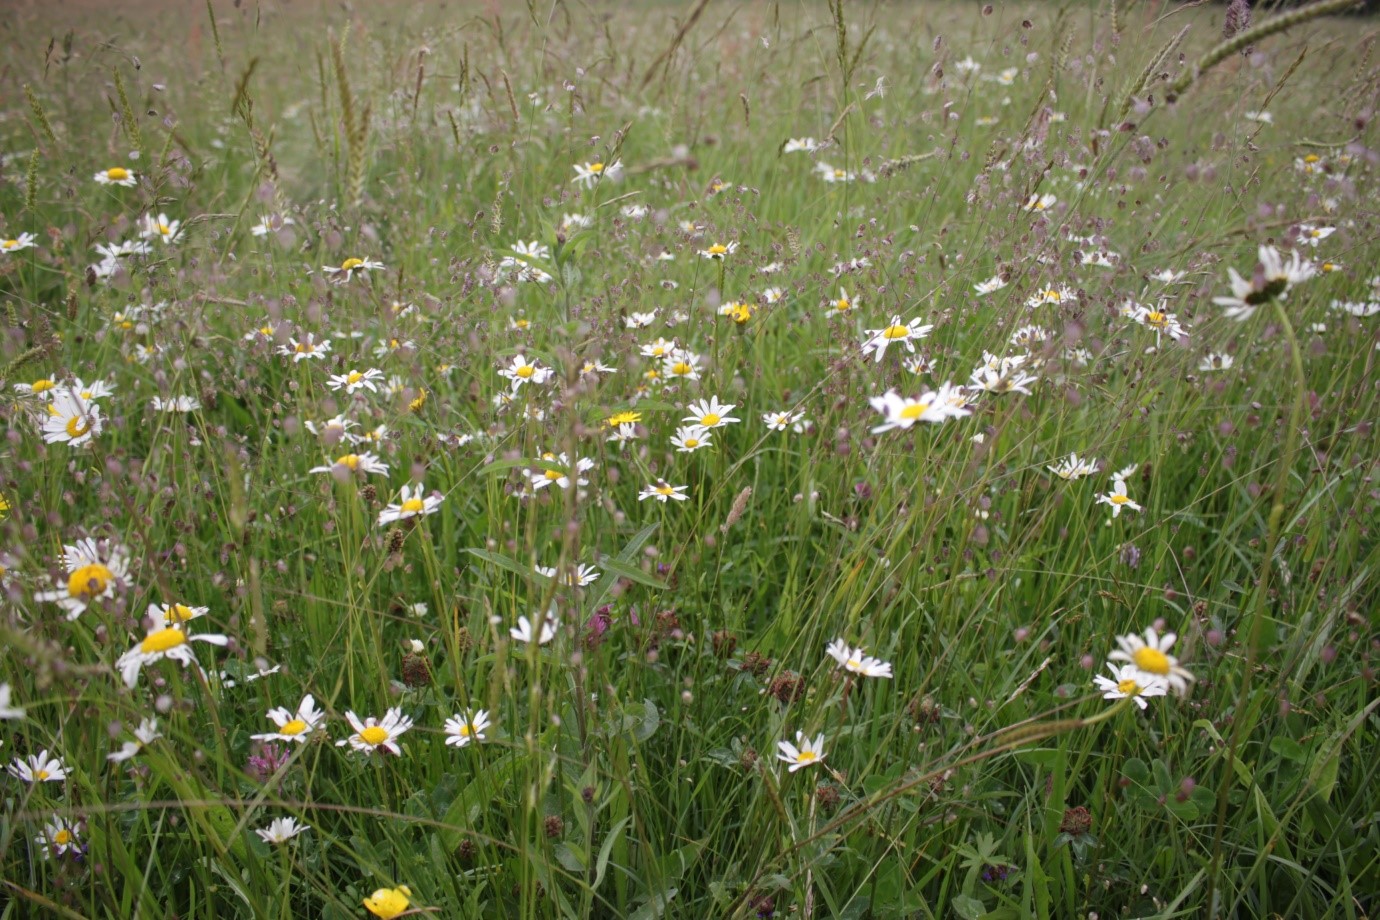 Flower-rich, dry hay meadow in County Leitrim